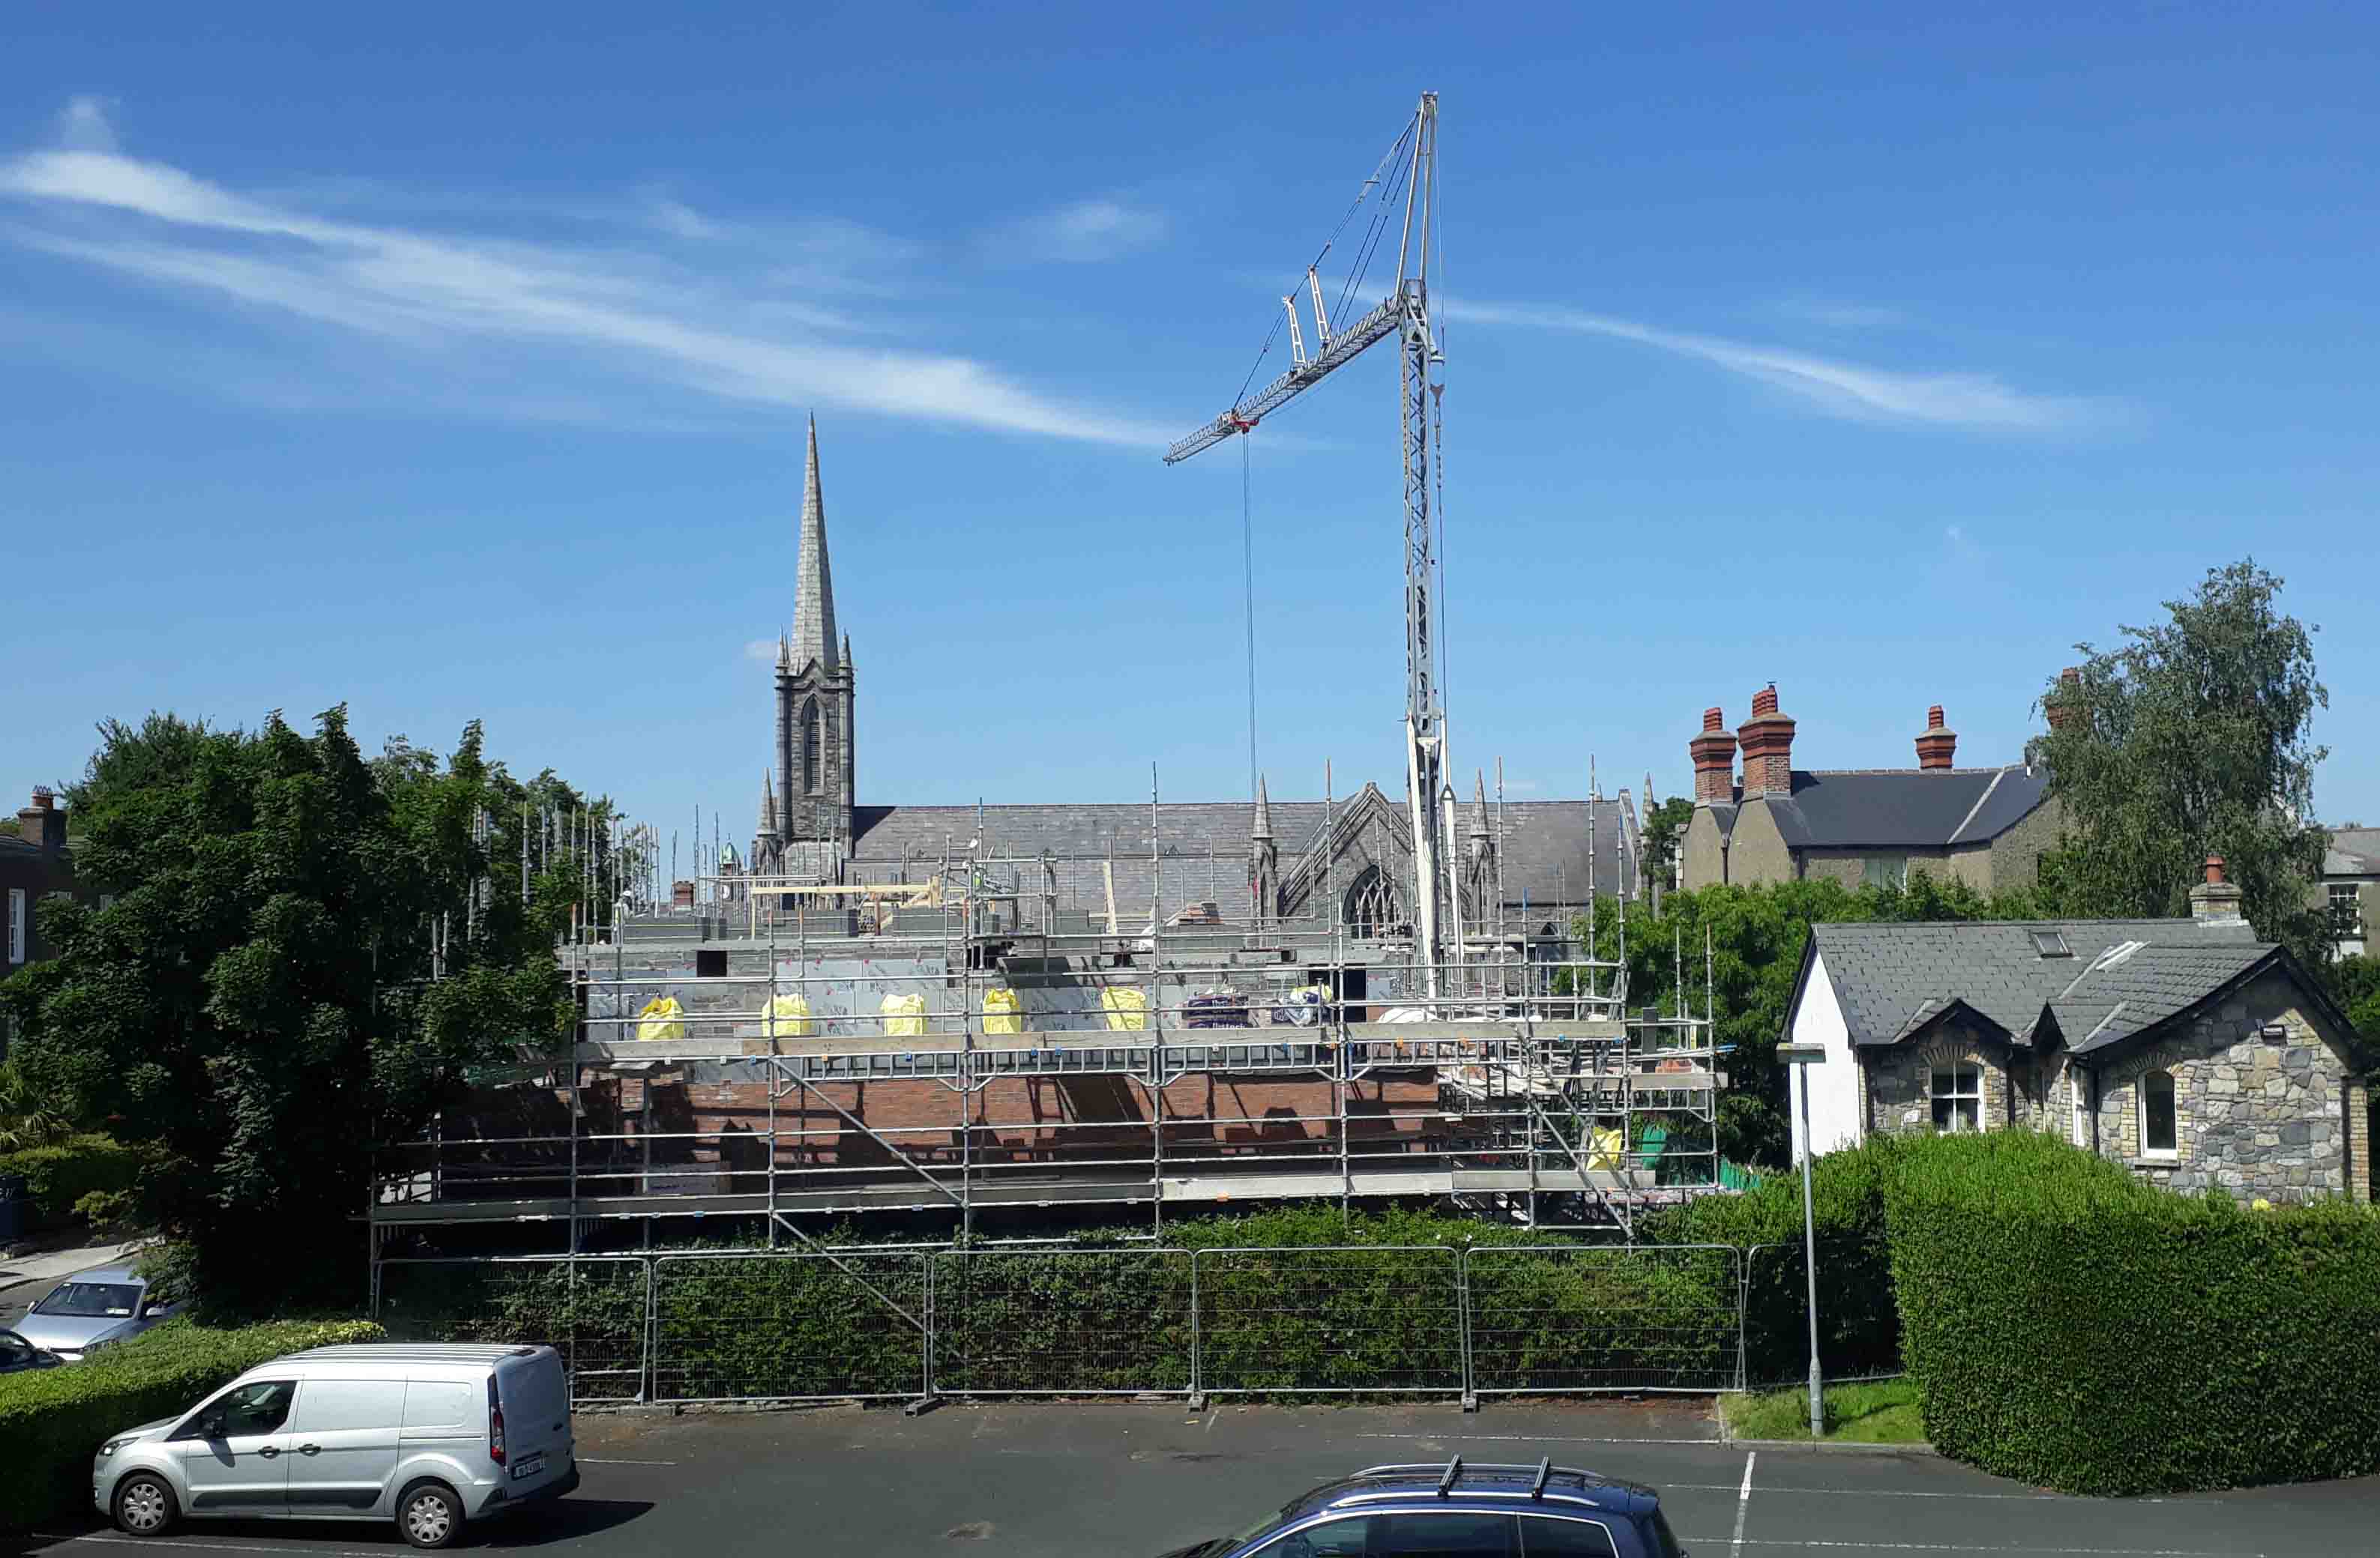 Building work continues on Rathmine's community hub, including housing units, as seen from Church House Dublin.